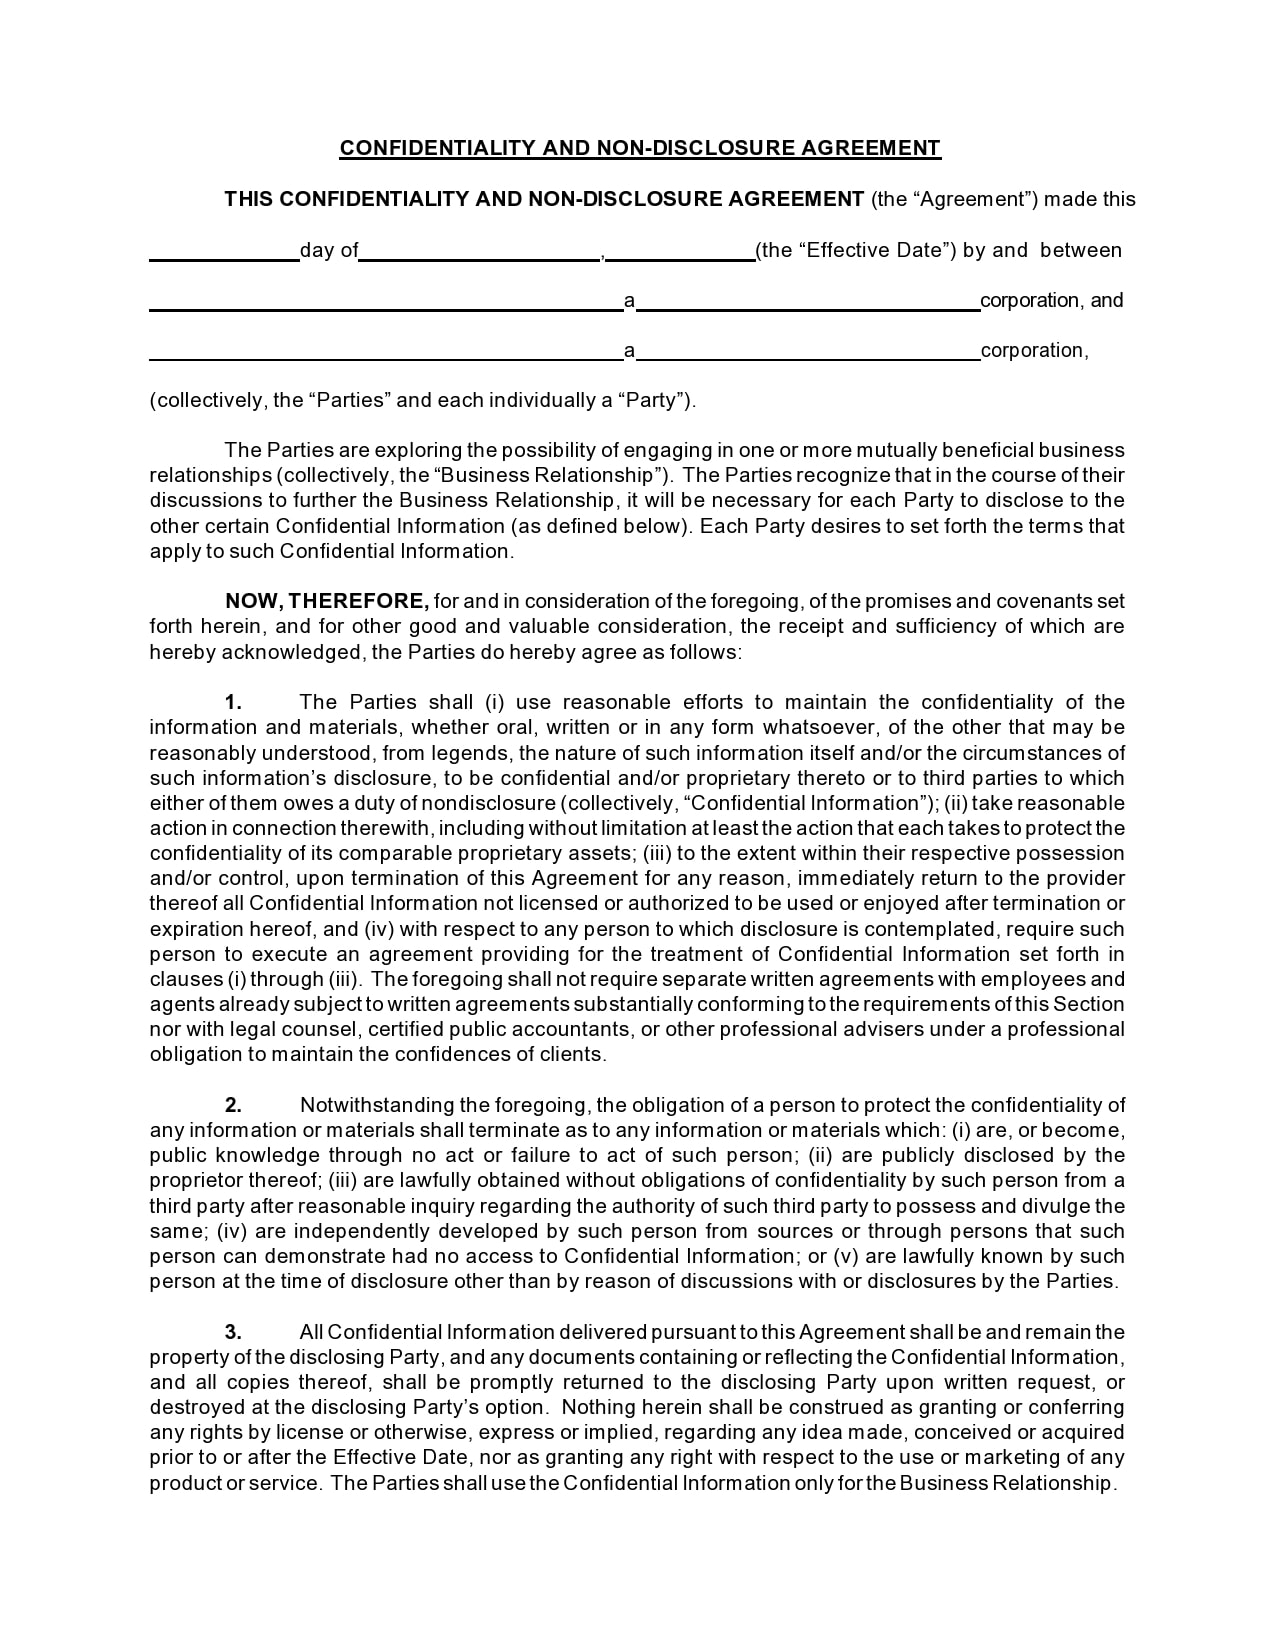 Free Non Disclosure Agreement Template from templatearchive.com